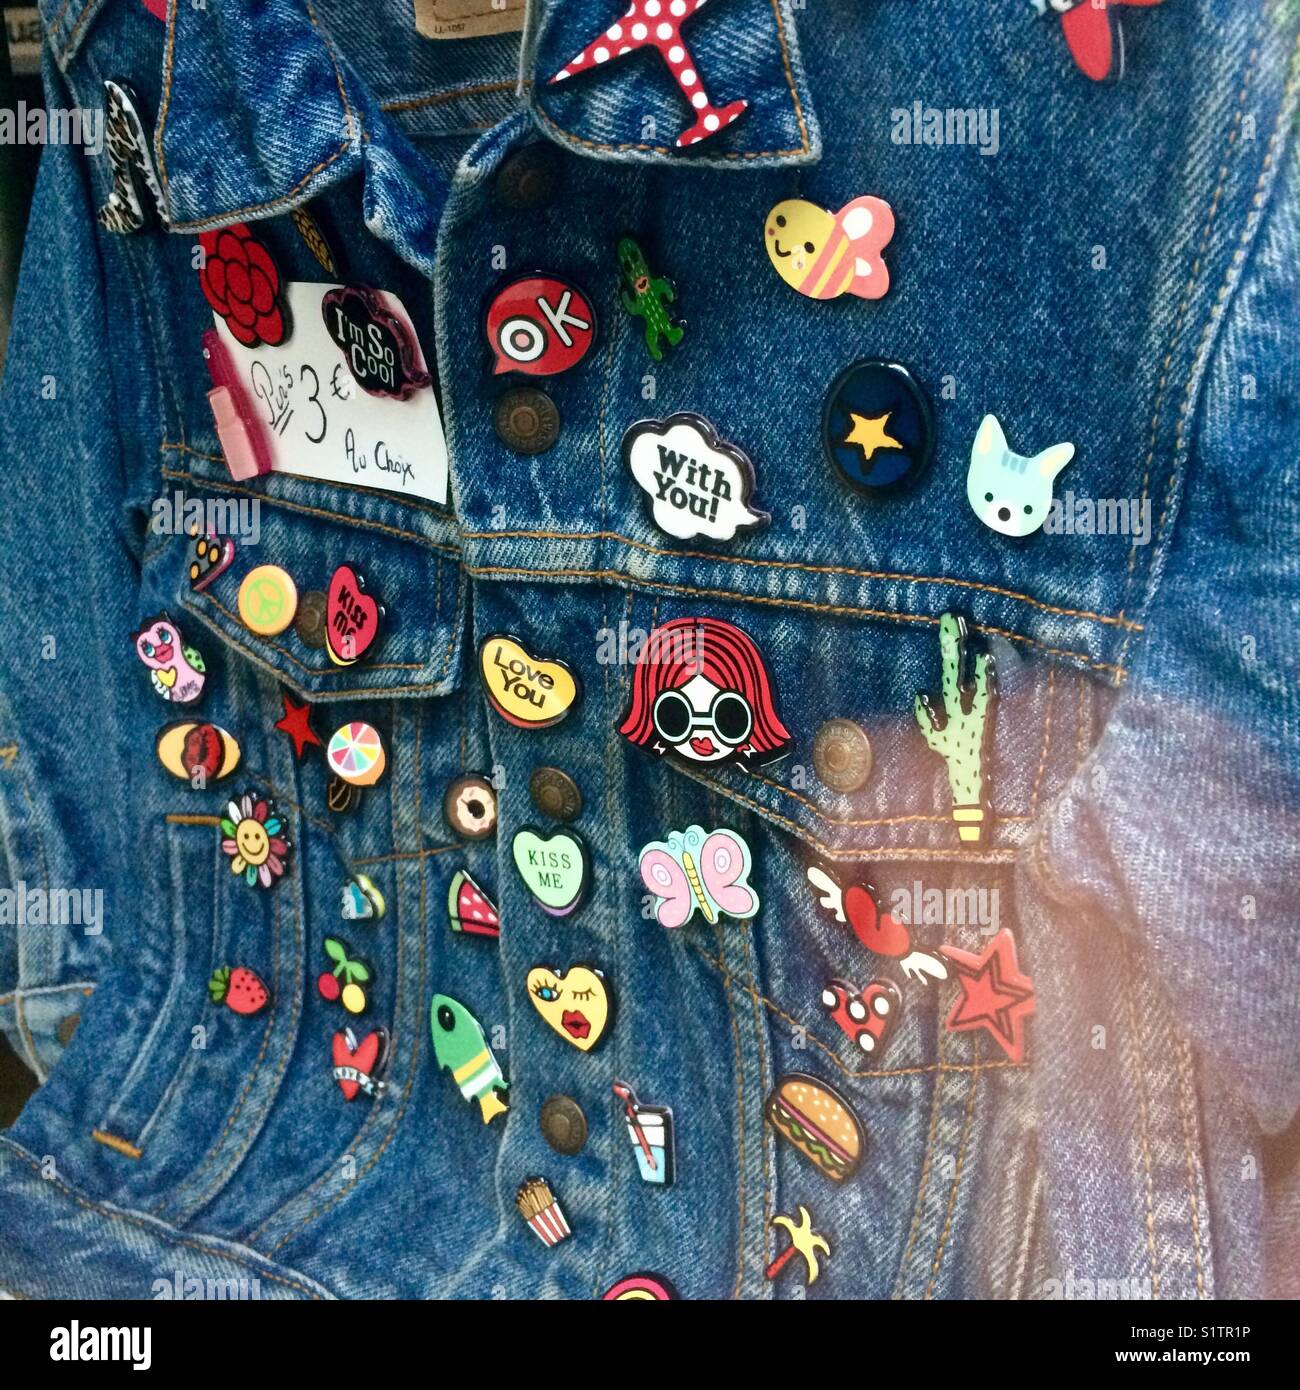 Jacket With Badges Clearance - tundraecology.hi.is